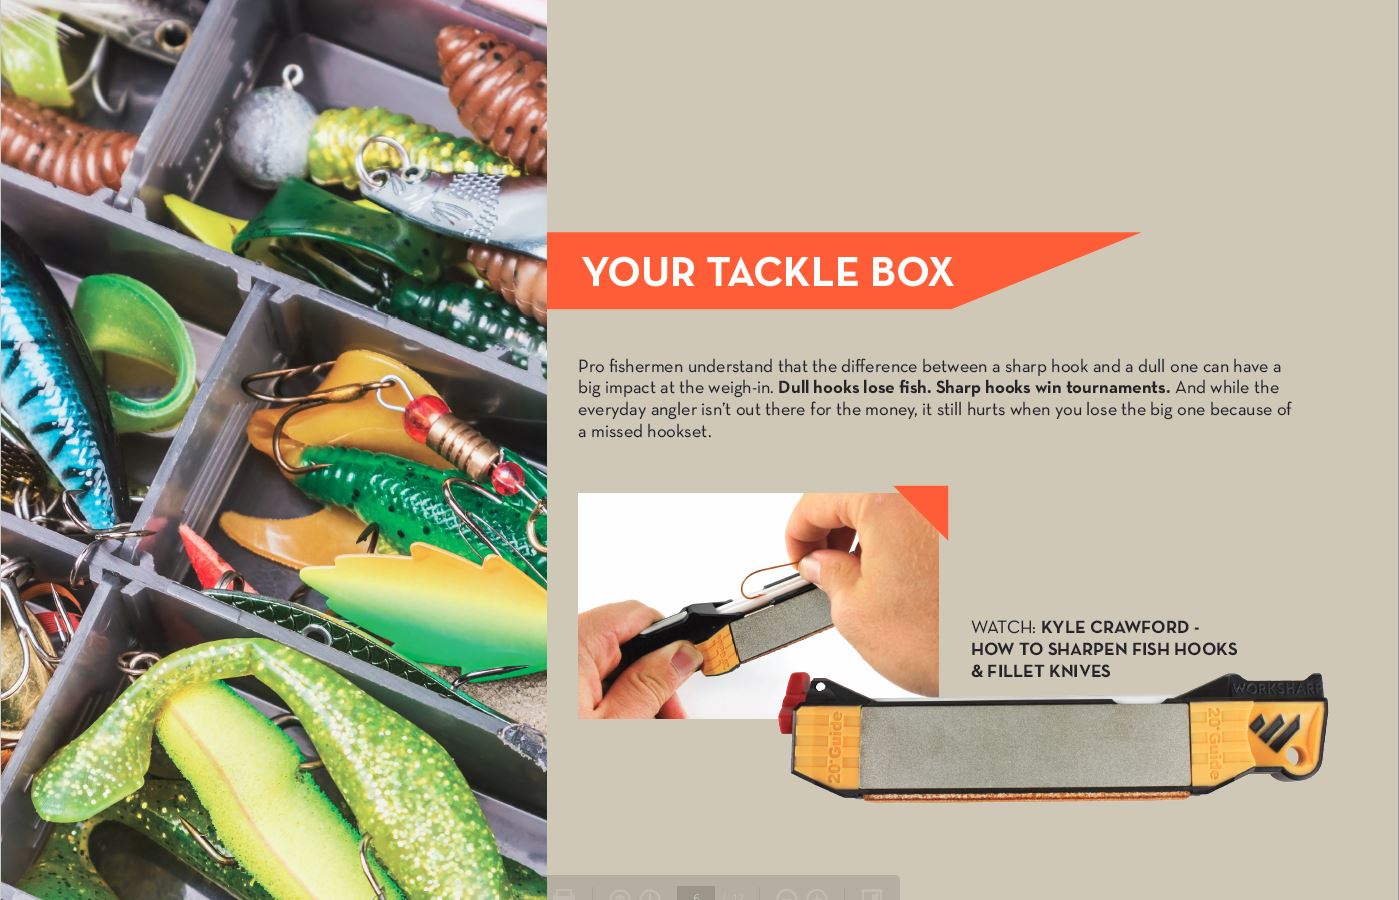 Sharpening From Your Tackle Box - Work Sharp Sharpeners